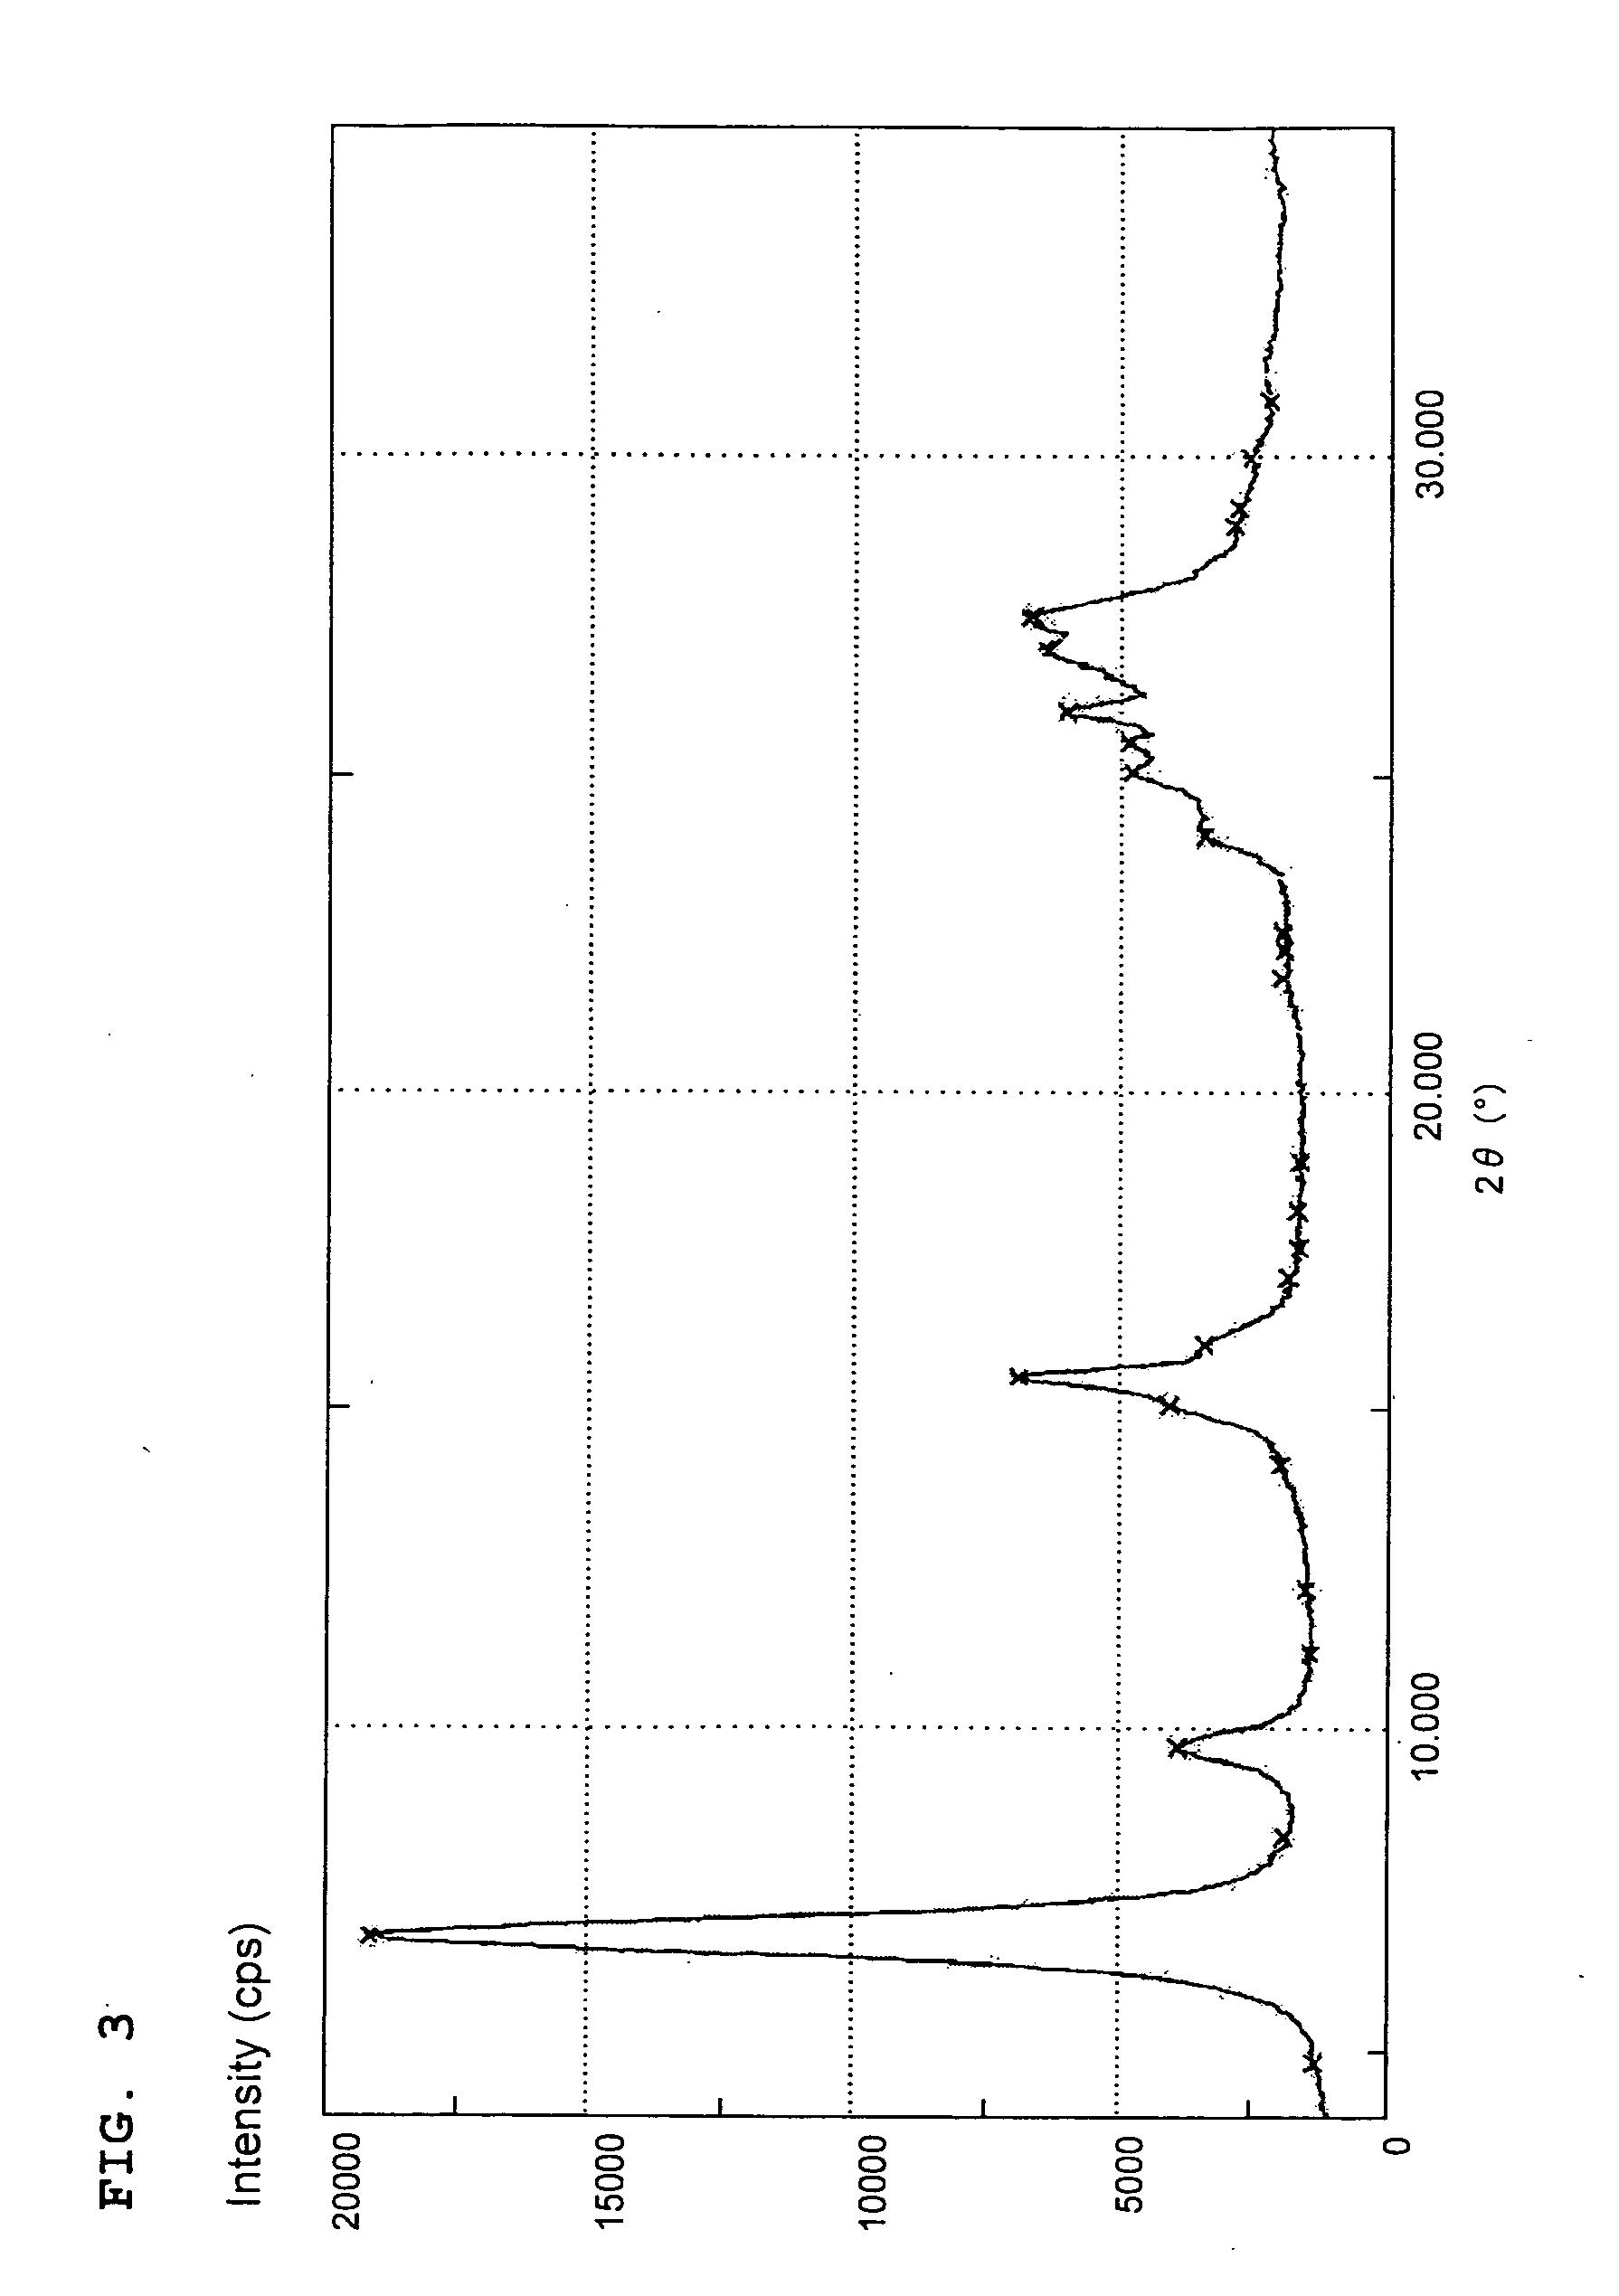 Coloring composition, method for production thereof, and coloring method